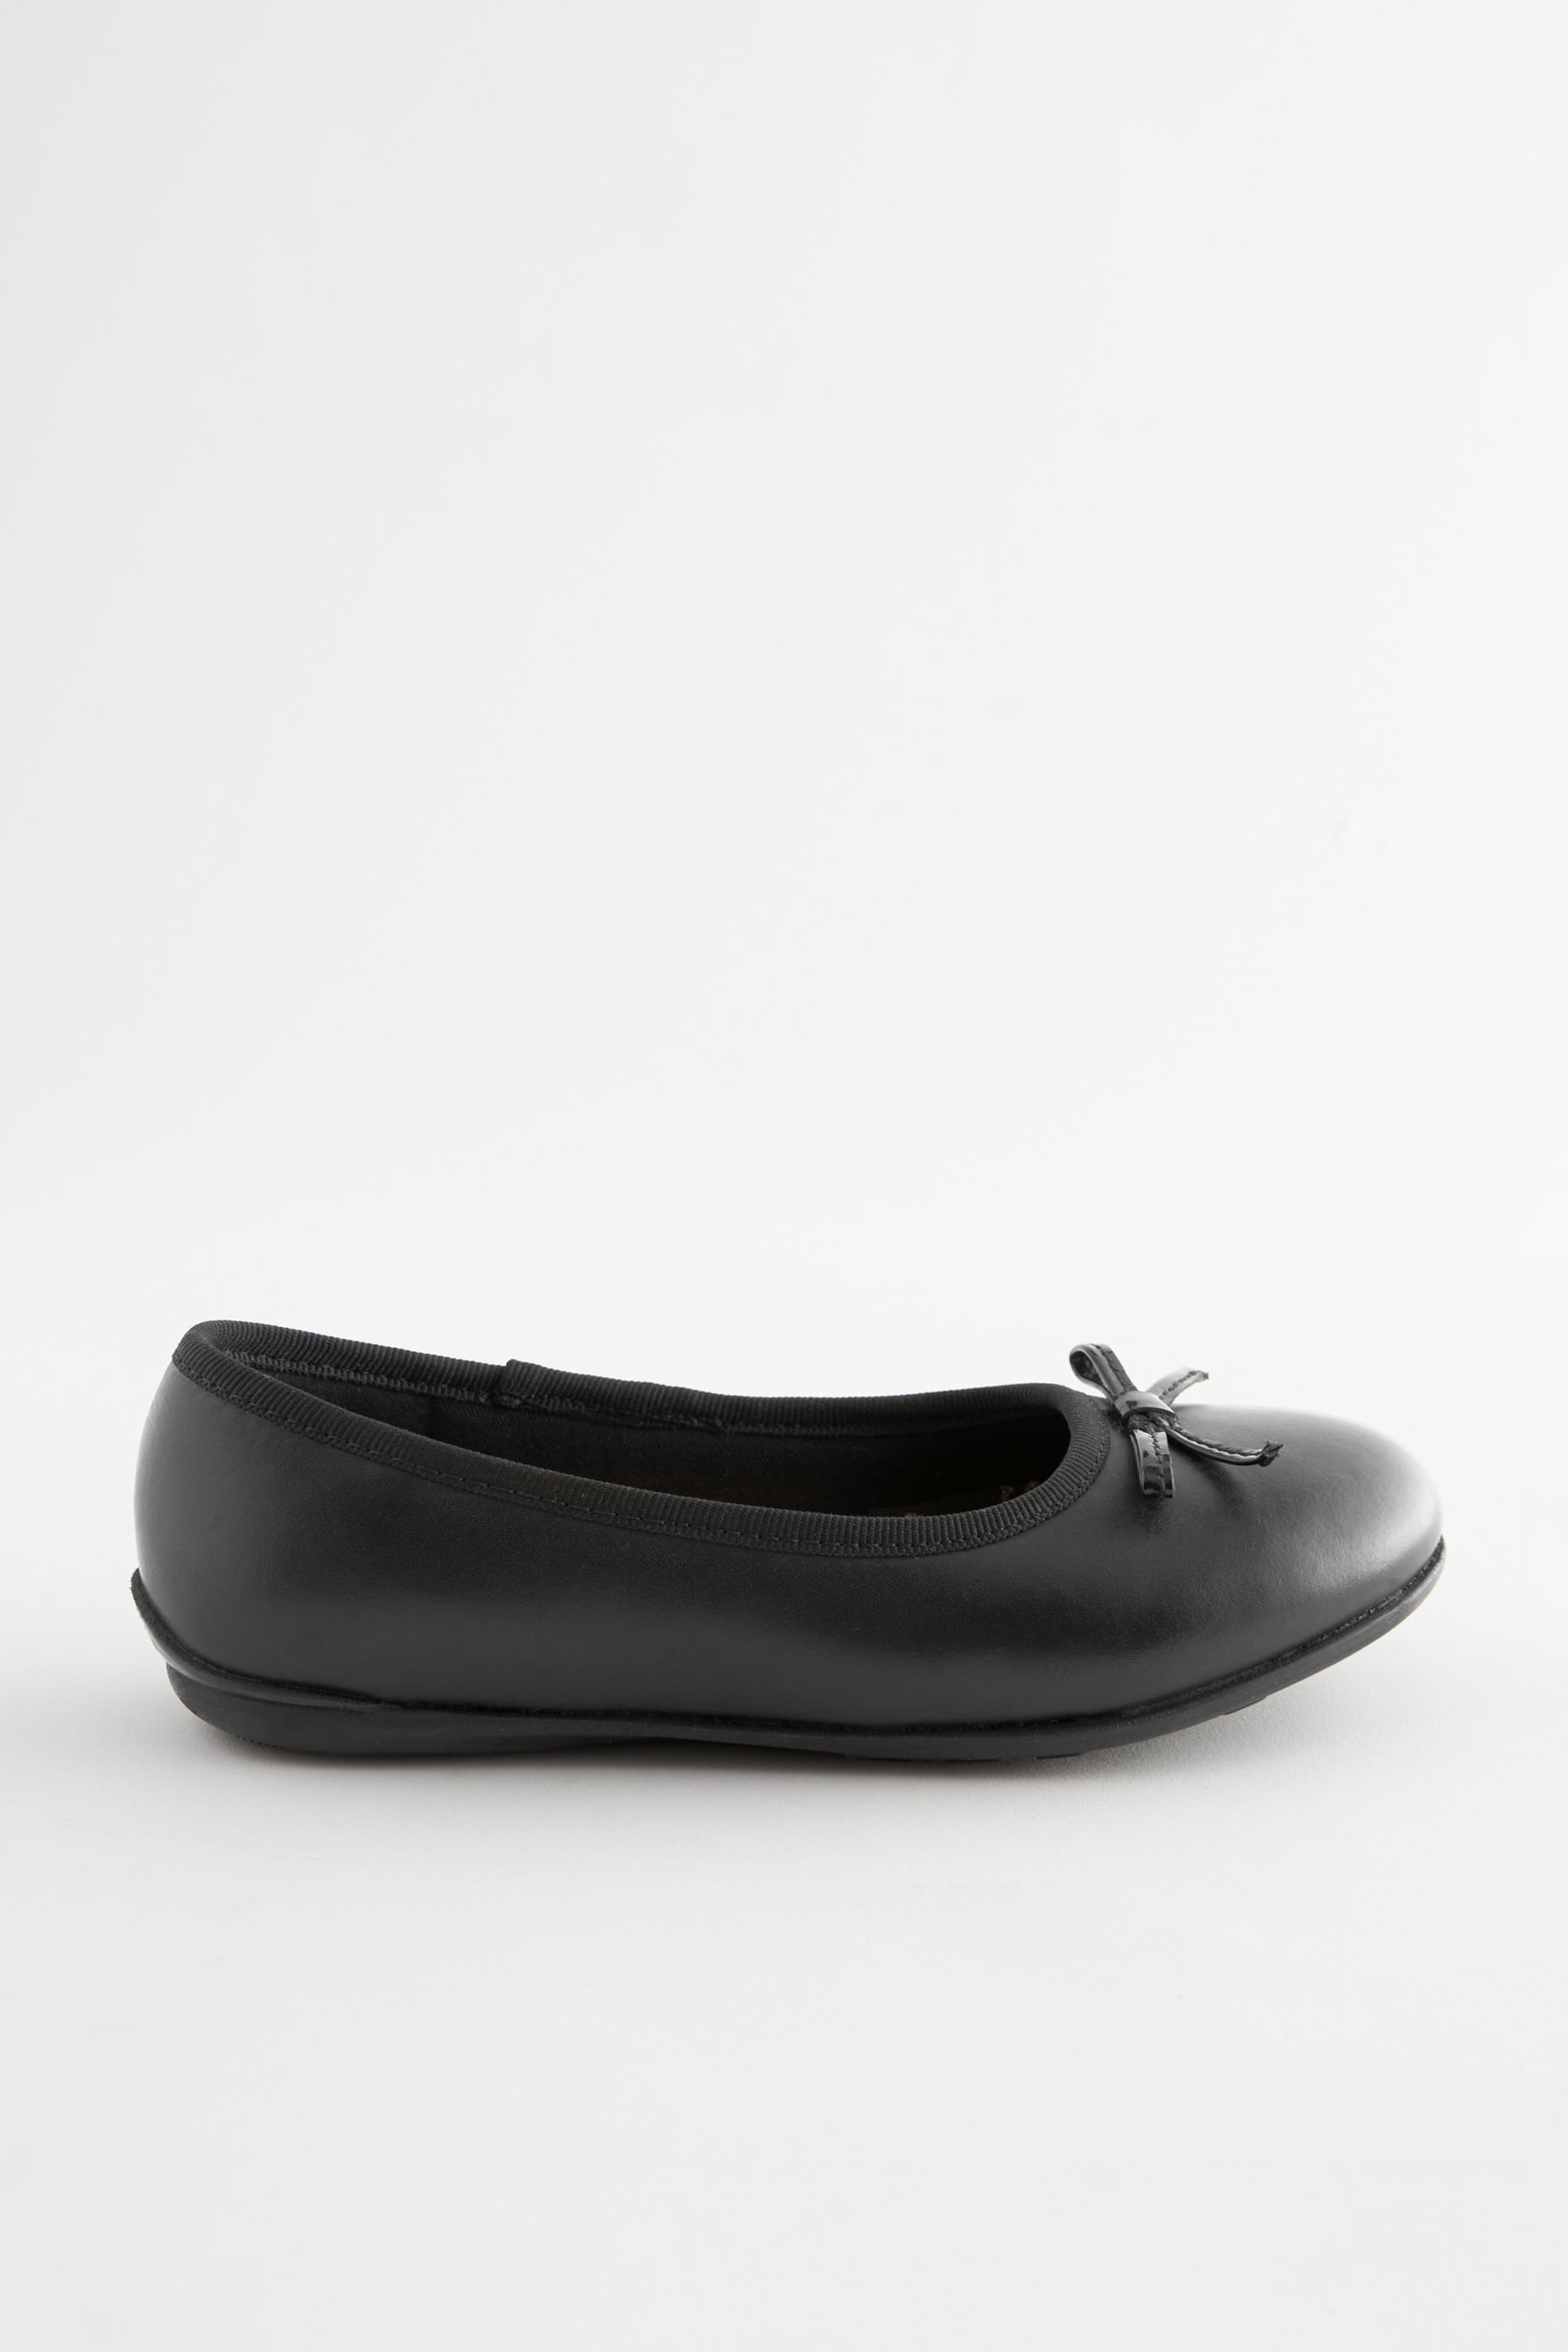 Black Wide Fit (G) School Leather Ballet Shoes - Image 4 of 5